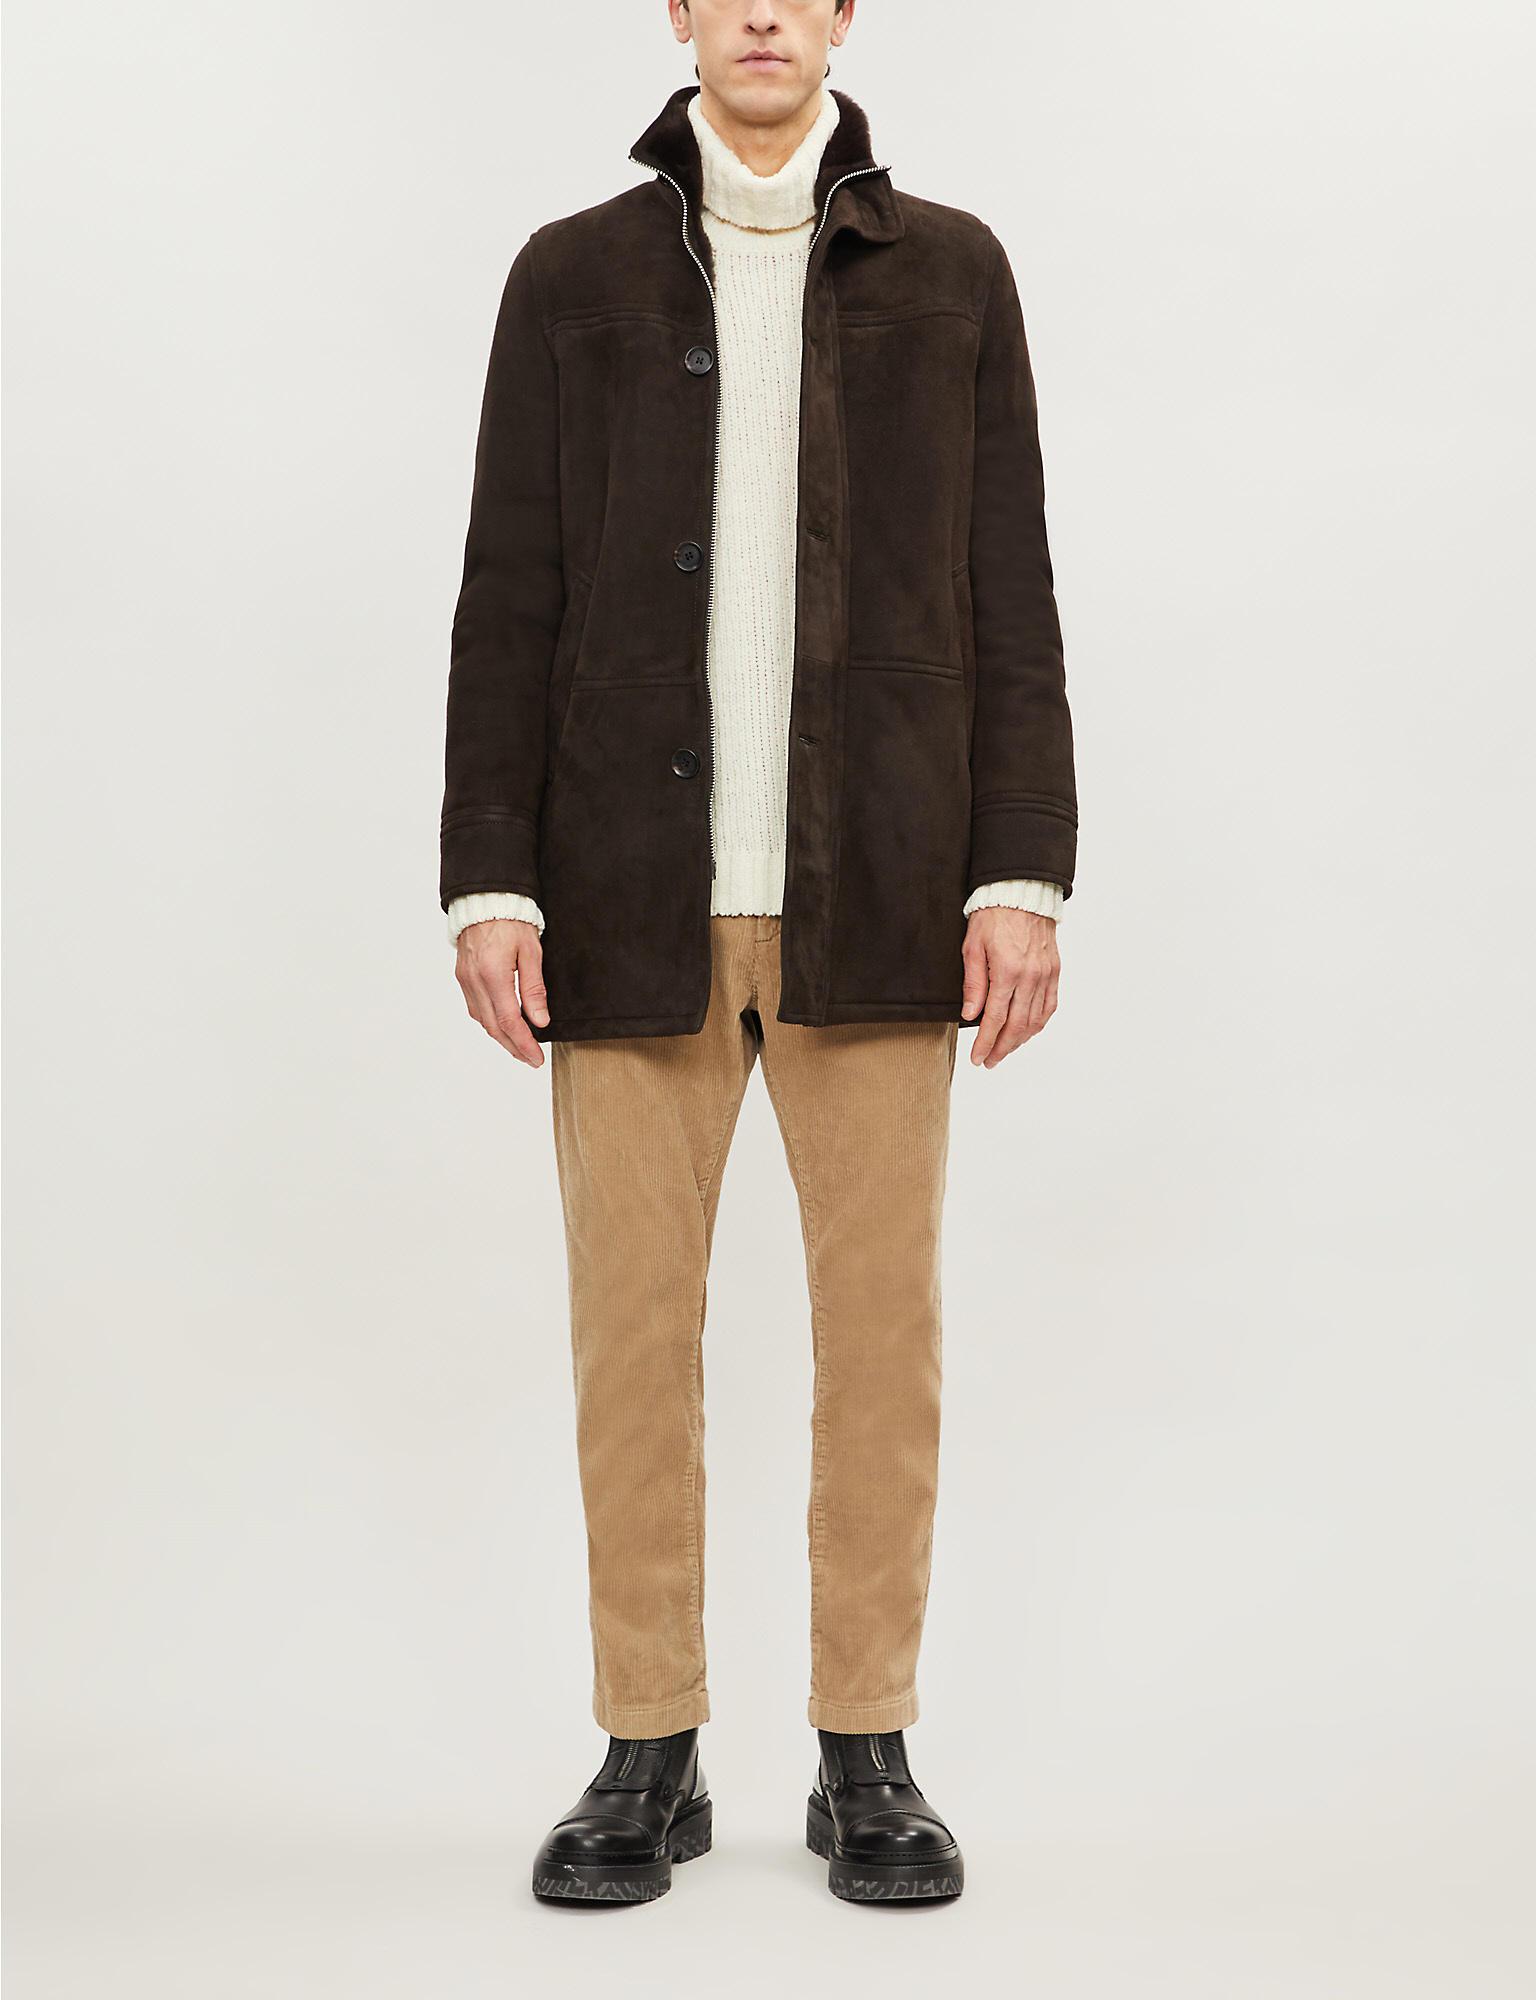 Oscar Jacobson Suede Carling Shearling Coat in Brown for Men - Lyst